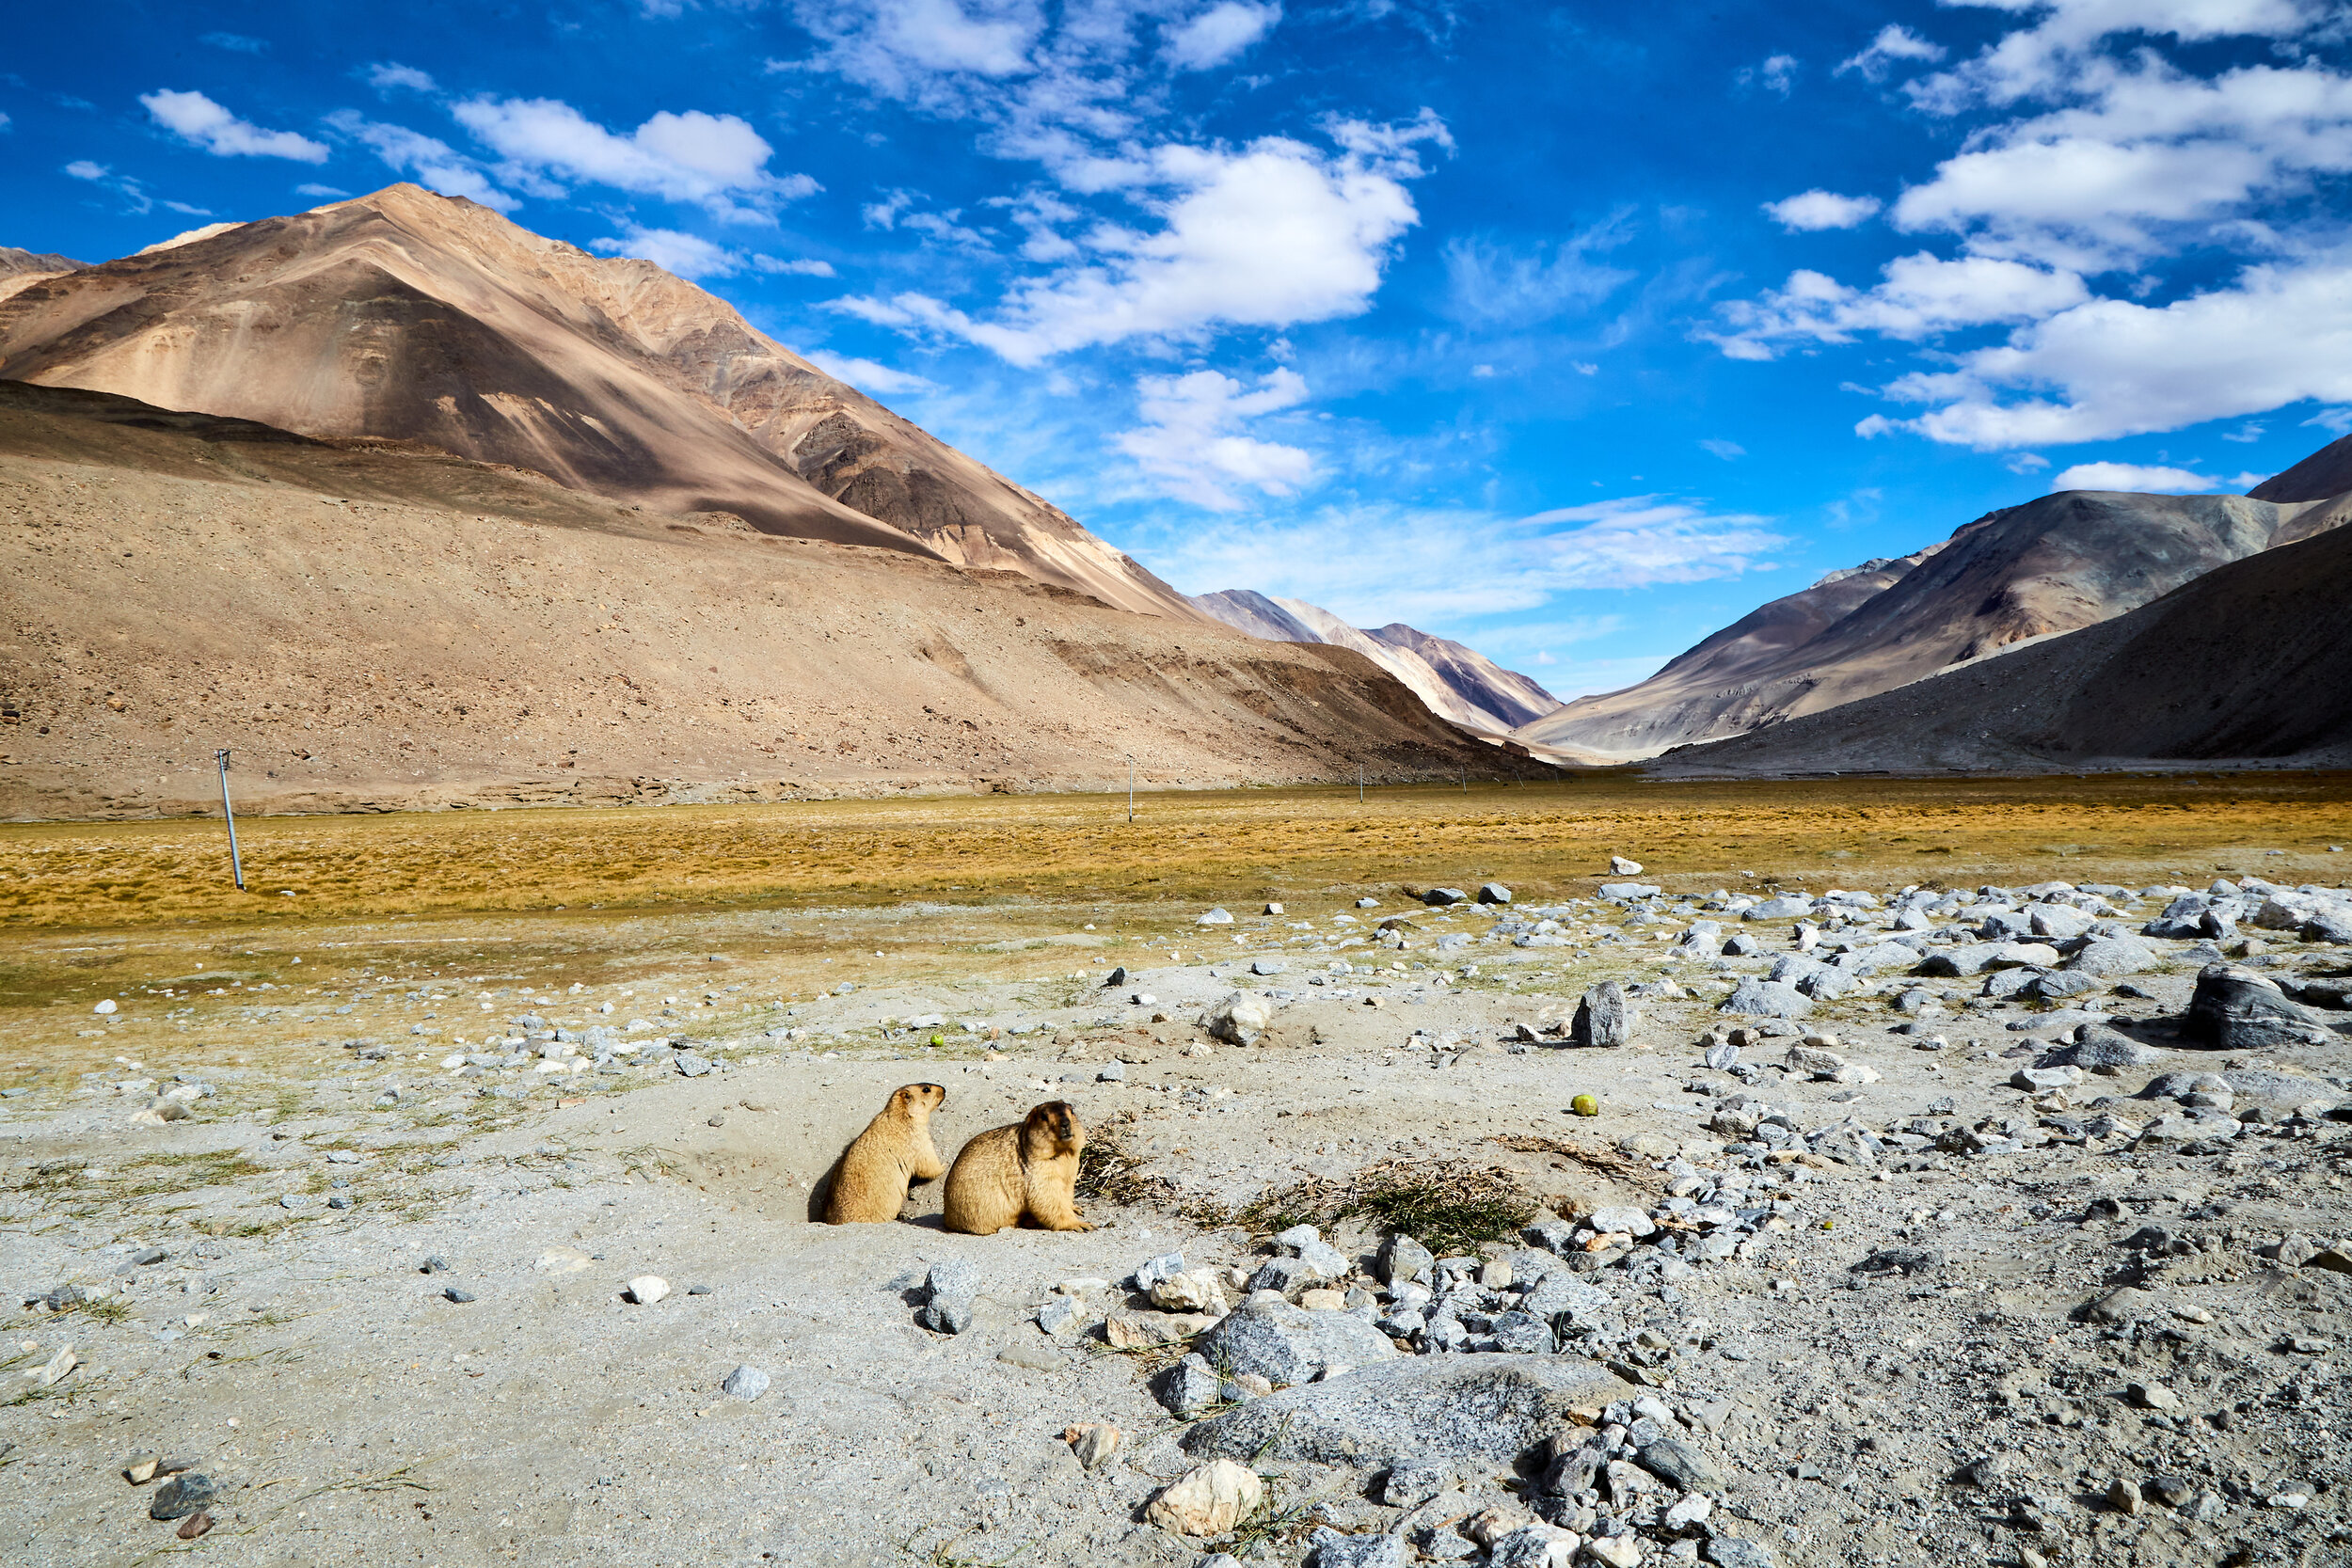  Landscapes are abundant and is one of the main reason for the majority of the tourist influx. It in-turn brings unwanted interference as well. These Himalayan marmots are now used to the apples being offered by the tourists.  